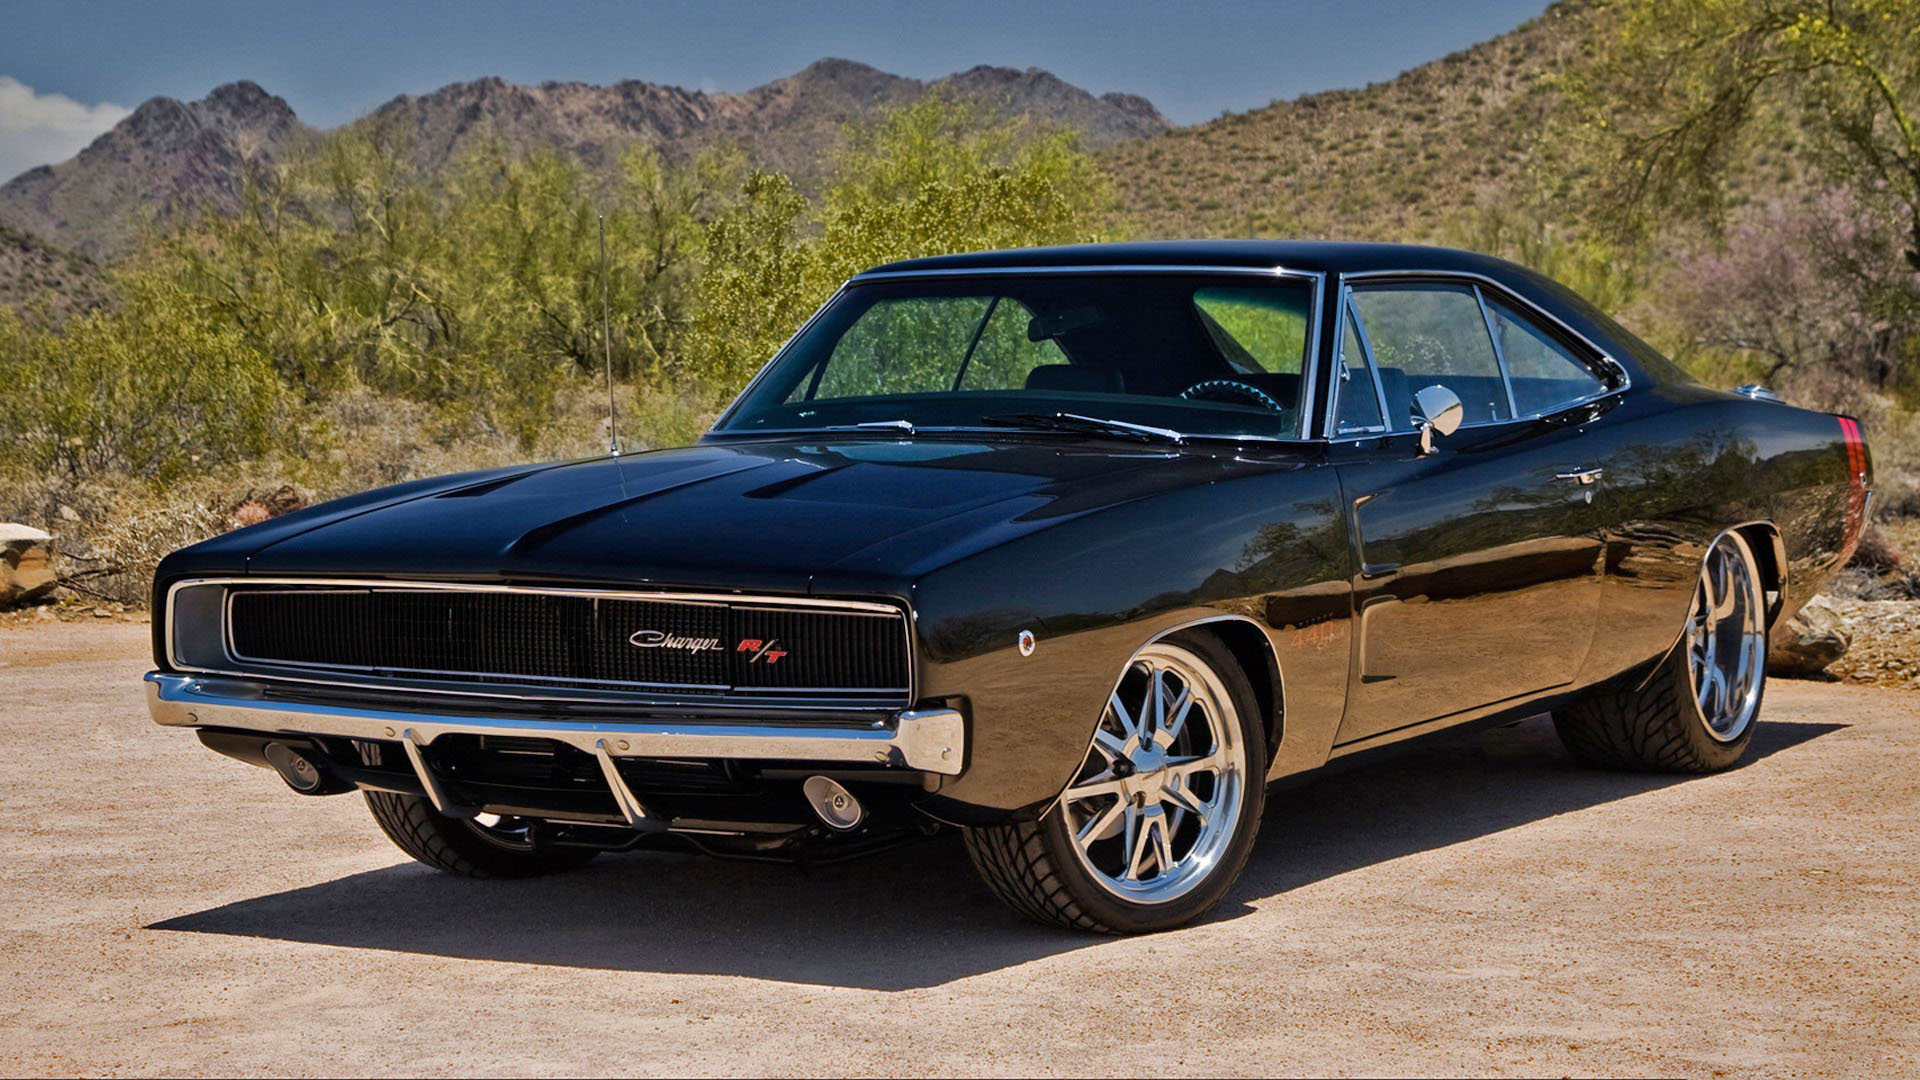 Free download Dodge Charger RT 1970 wallpaper background [1920x1080] for your Desktop, Mobile & Tablet. Explore 1970 Dodge Charger RT Wallpaper Dodge Charger Wallpaper, 1970 Dodge Charger Wallpaper, Dodge Charger Wallpaper Full Screen